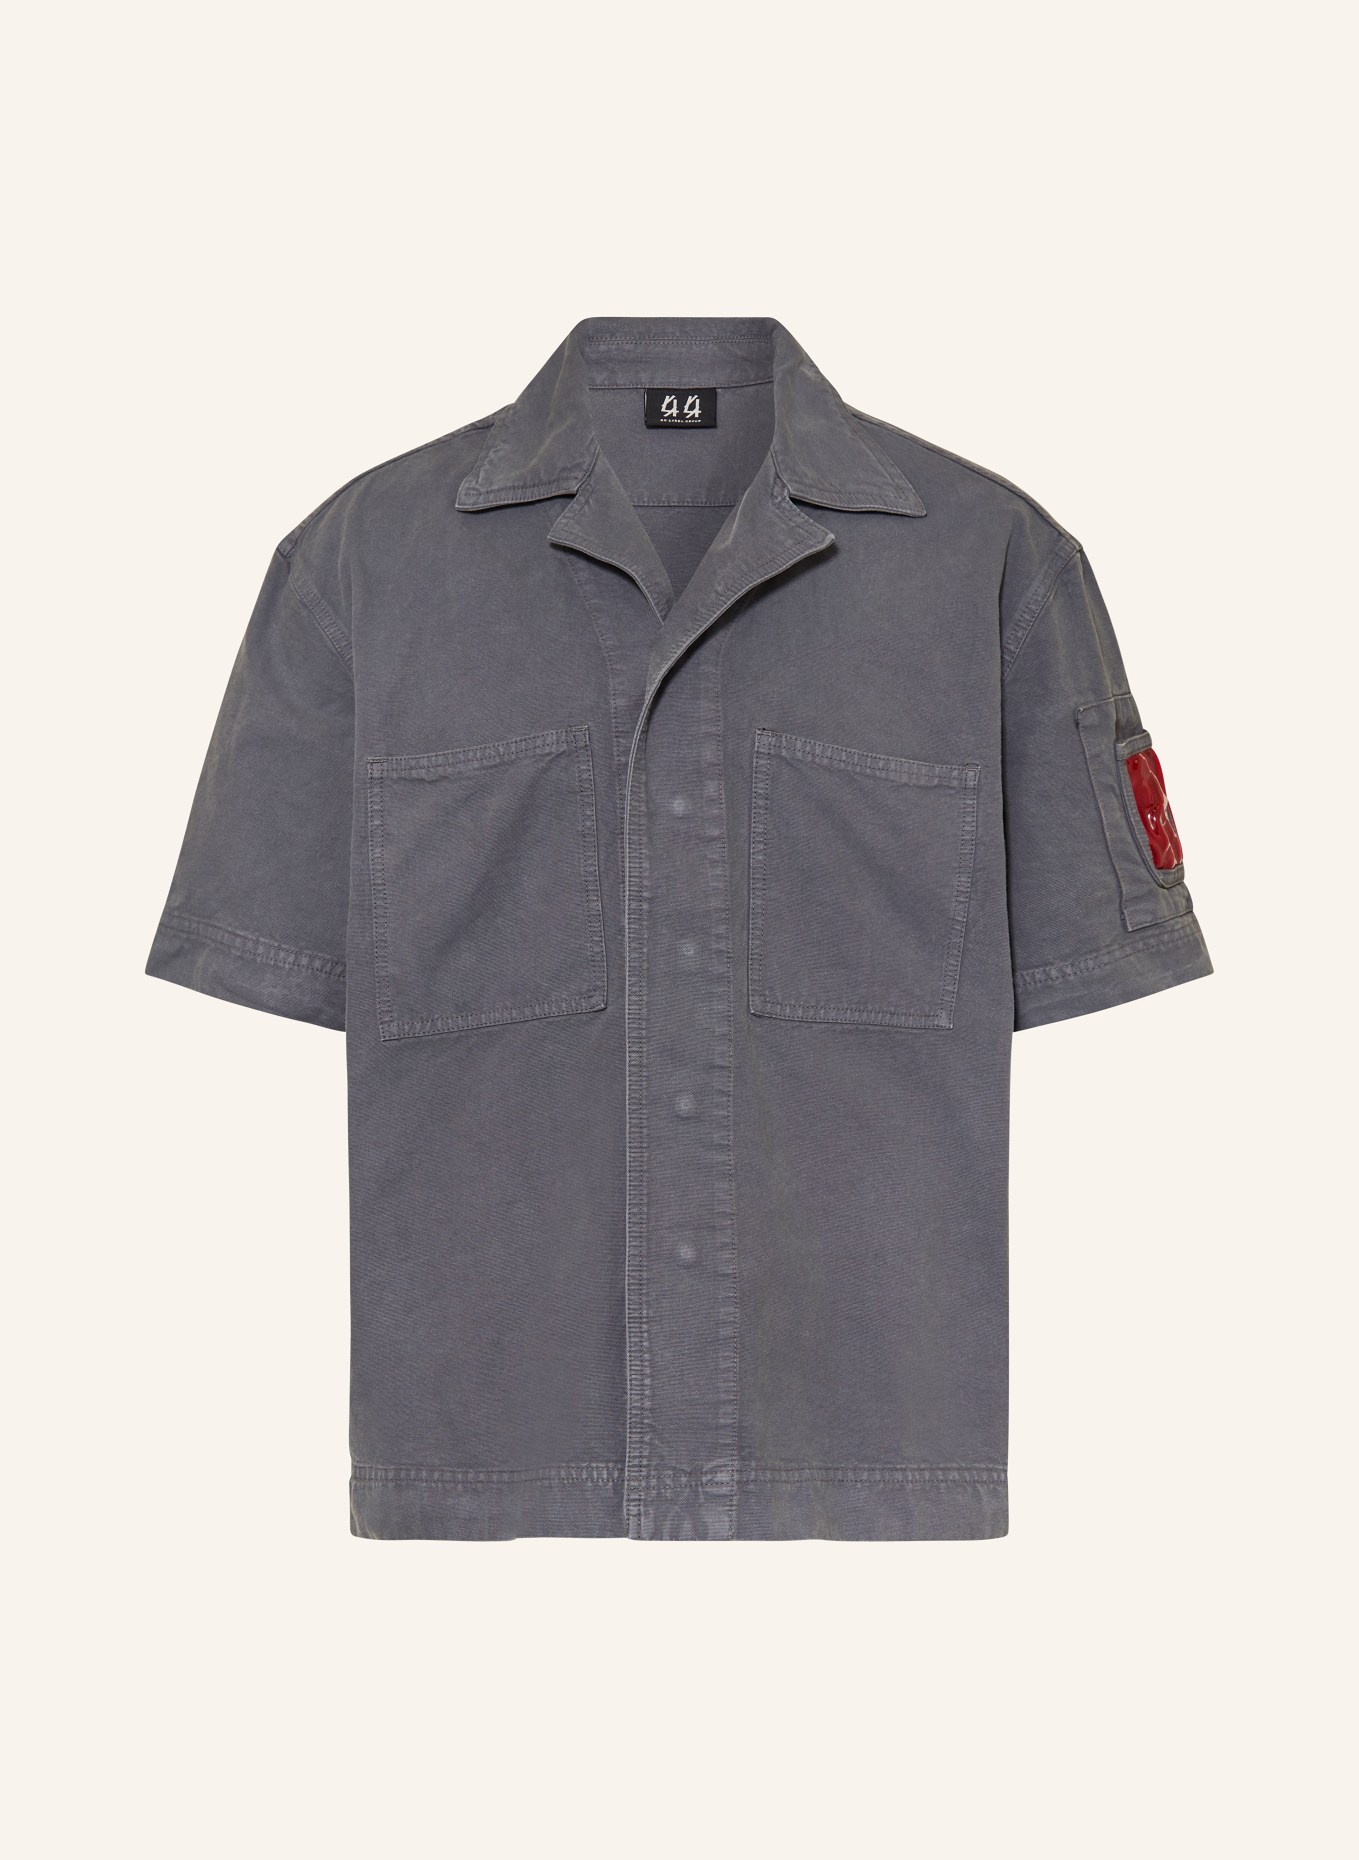 44 LABEL GROUP Resort shirt ID comfort fit, Color: GRAY (Image 1)